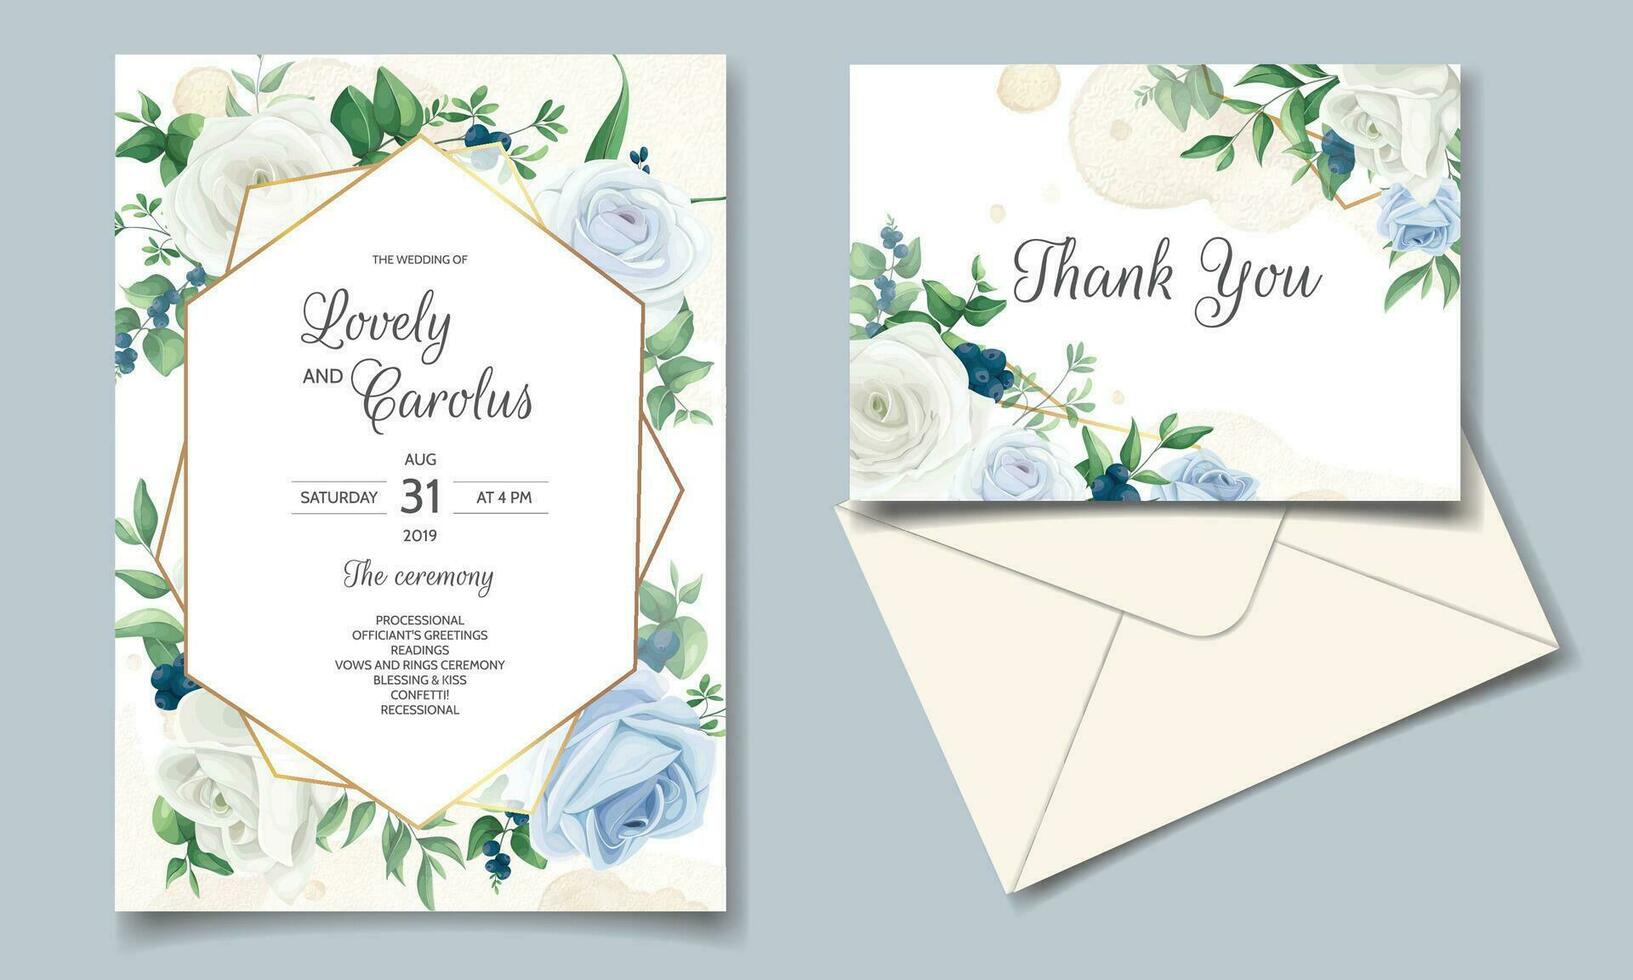 Elegant wedding invitation card with greenery leaves and blueberries vector